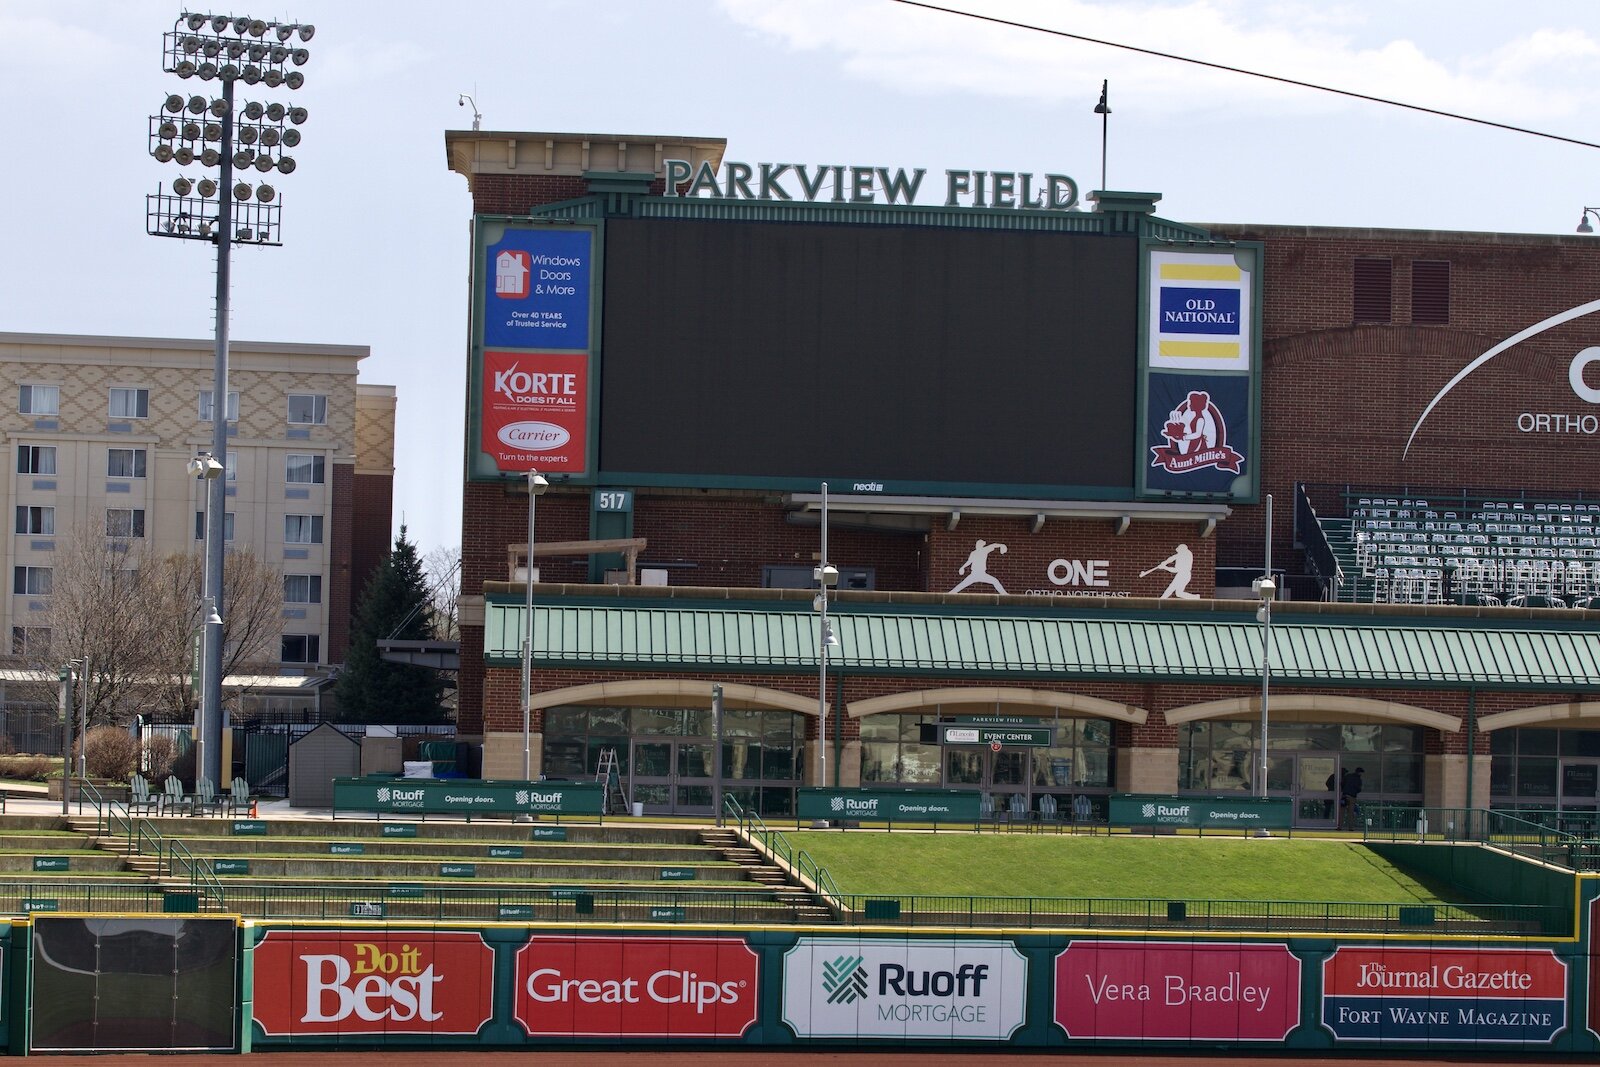 The large video screen and lawn seats where both details inspired by other popular ballparks.